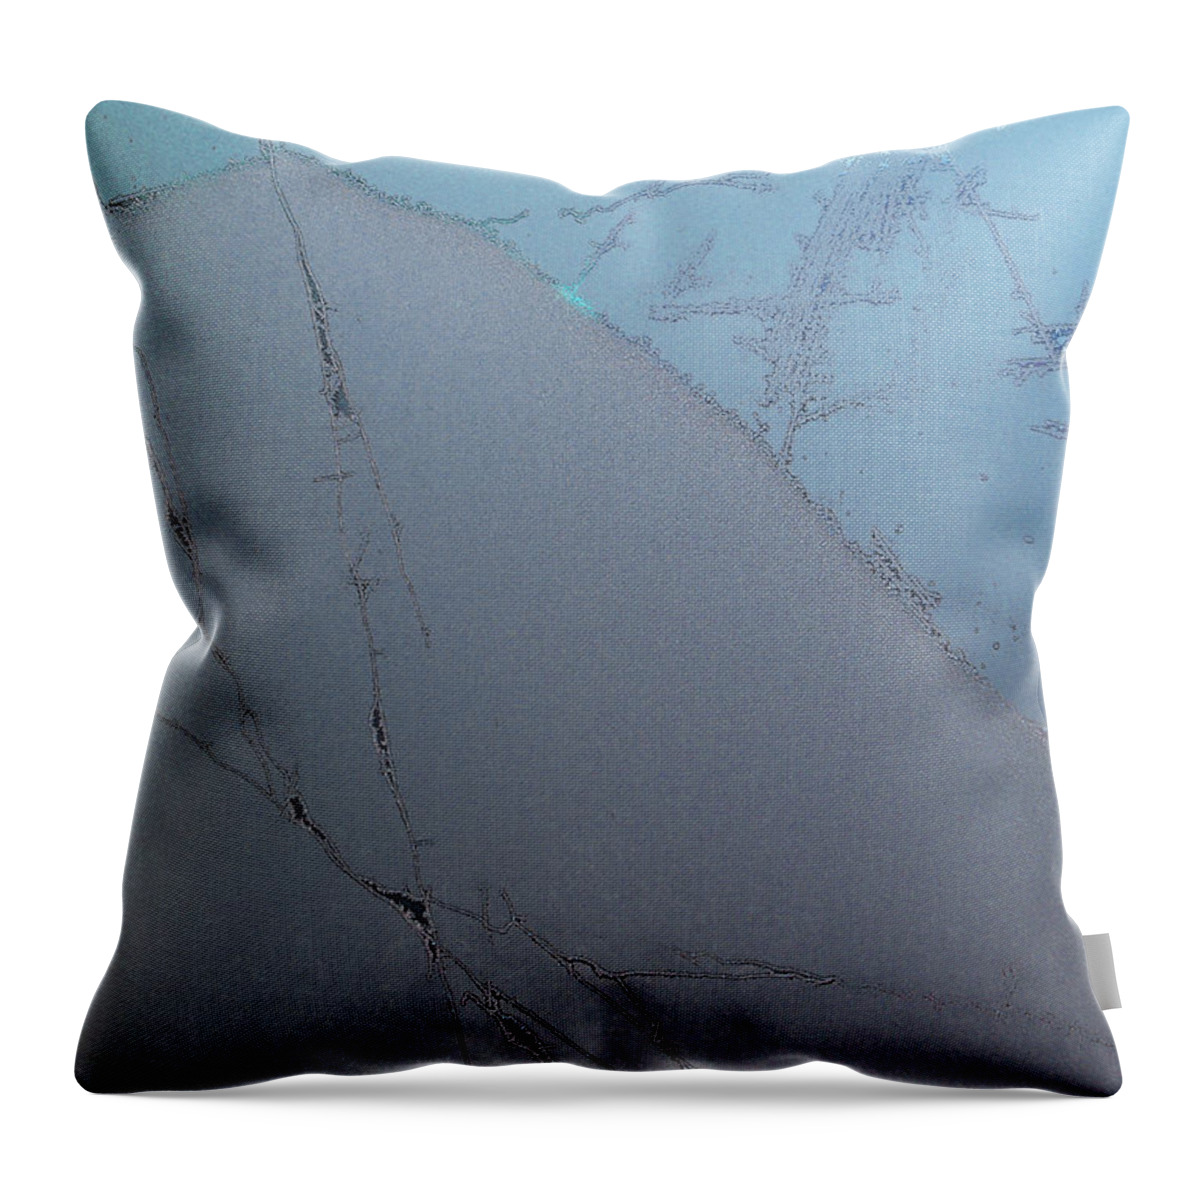 Frostwork Throw Pillow featuring the photograph Frostwork - The Hill by Attila Meszlenyi